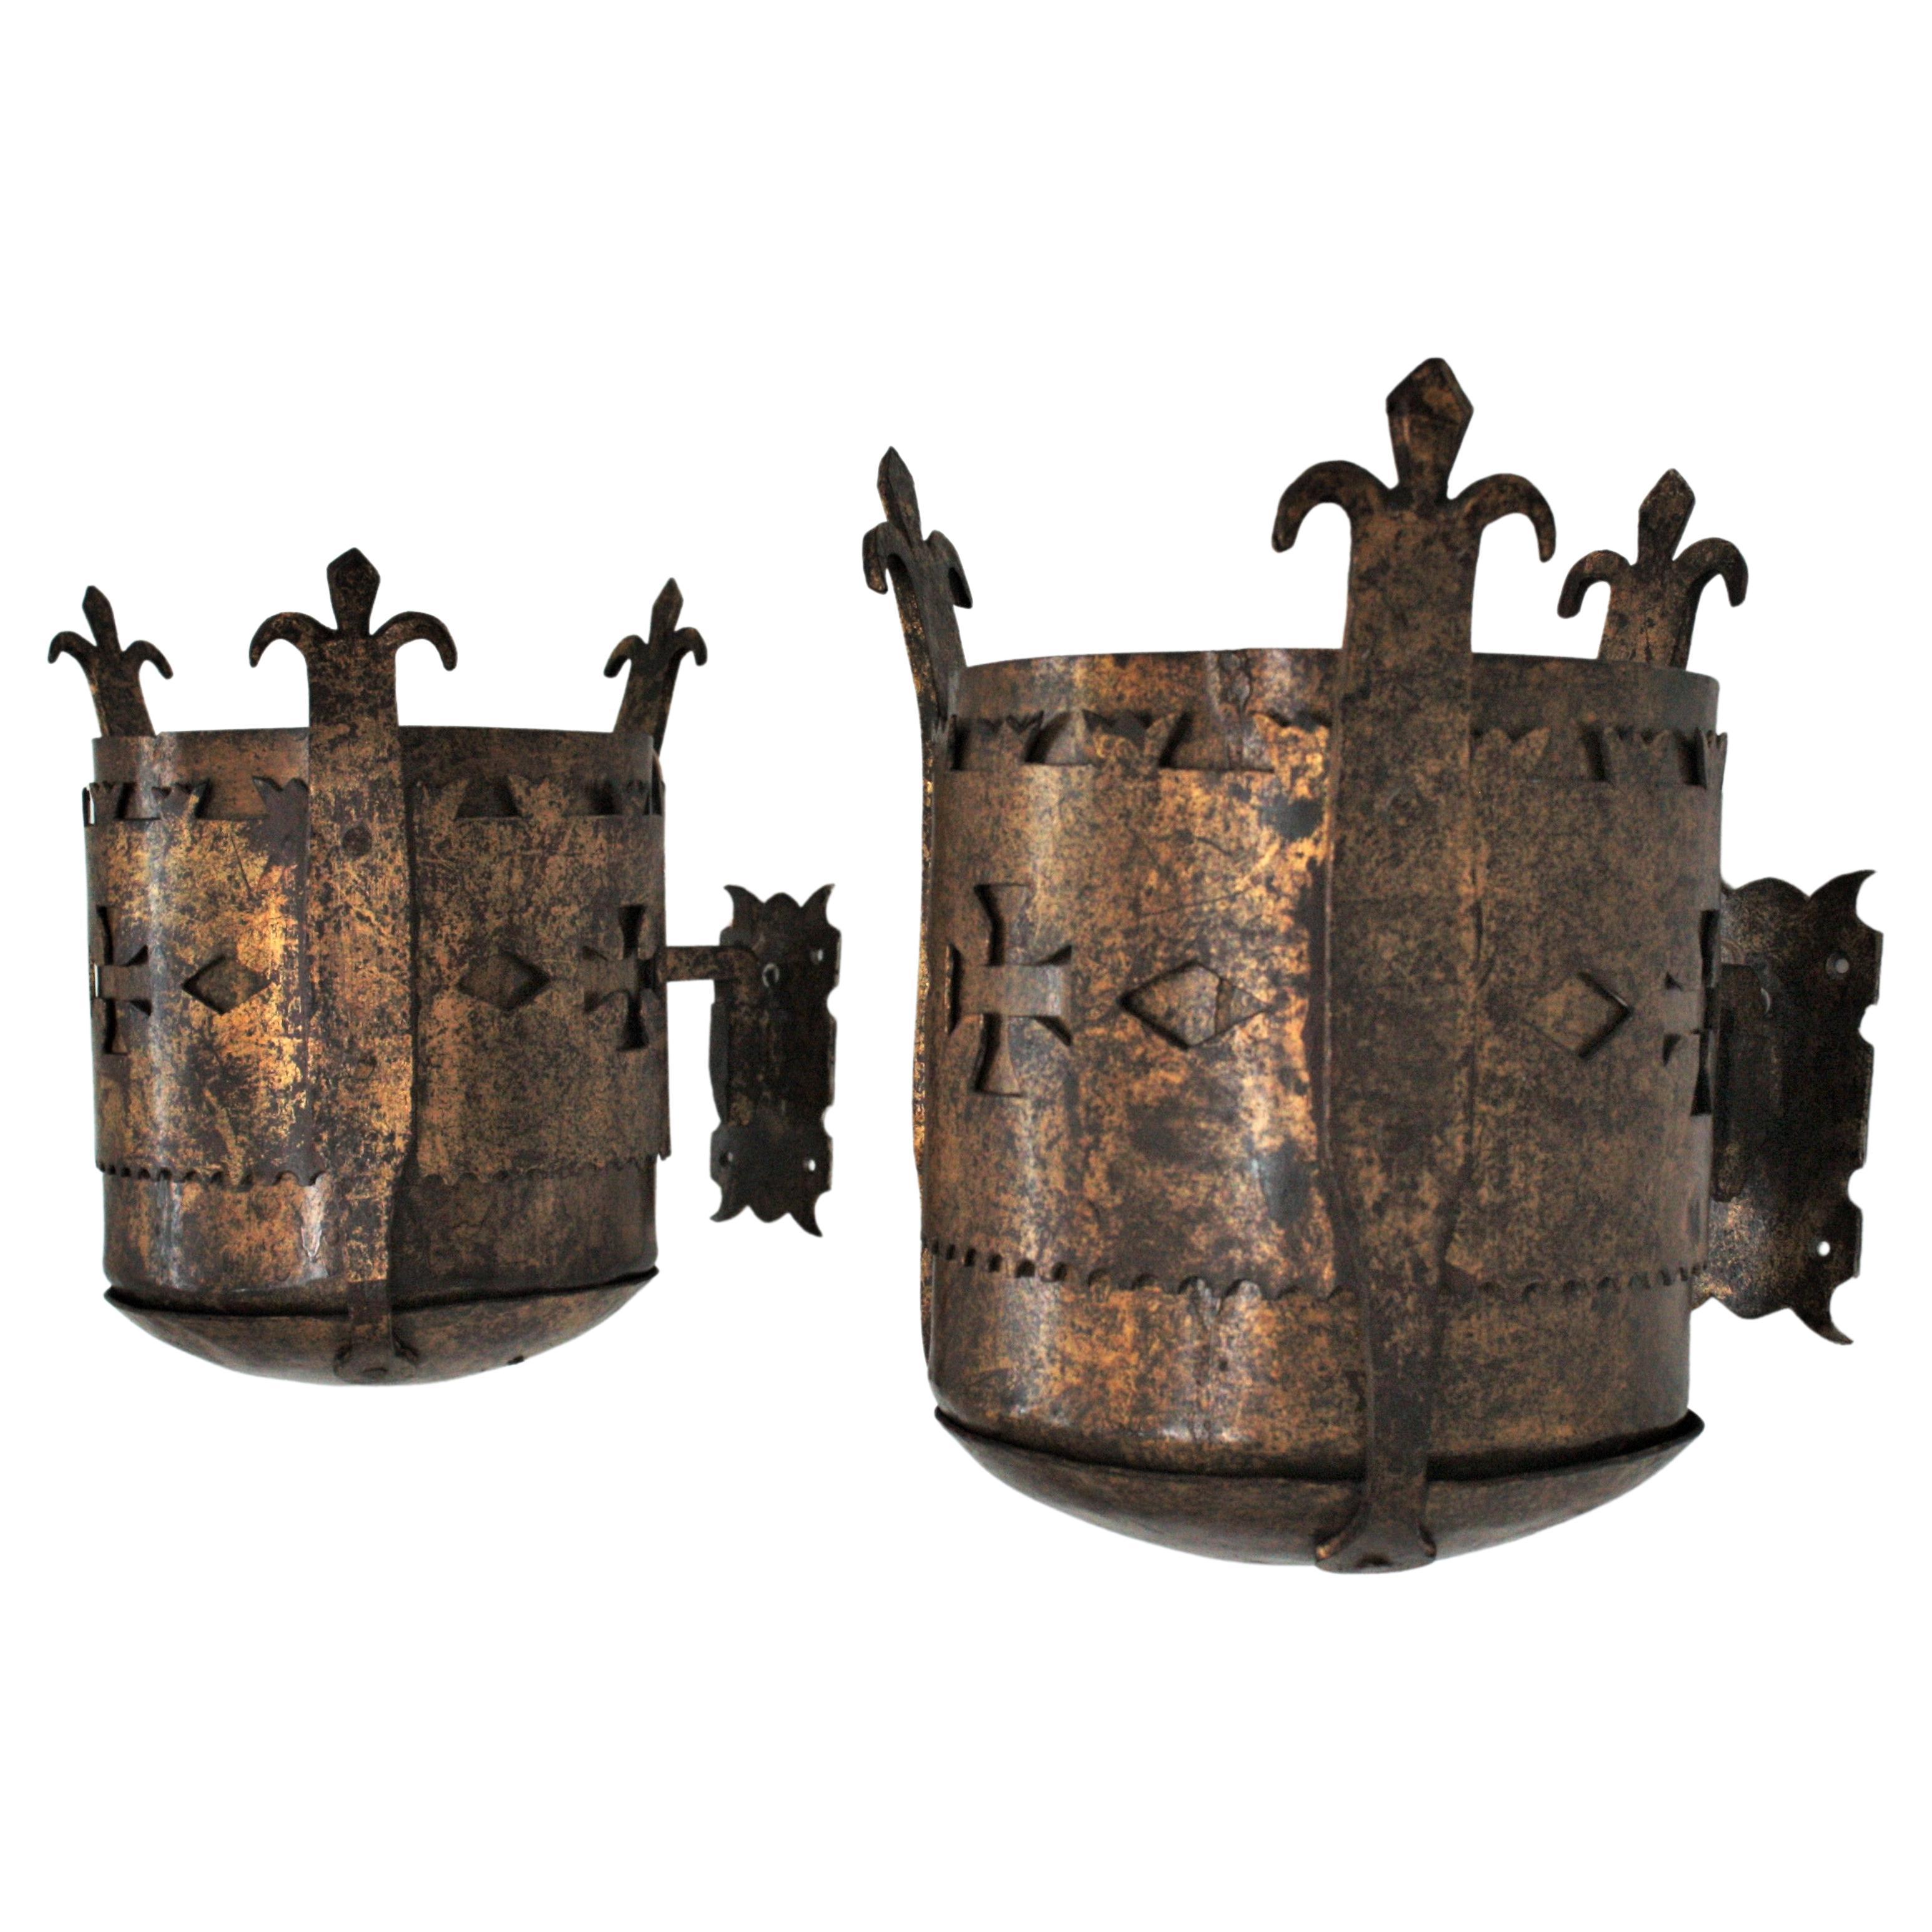 Spanish Medieval style hand forged uplighter torch wall sconces, 1930s.
Rare hand forged iron gothic inspired cylinder wall lights with terrific aged patina showing the original gold leaf gilding.
This pair of medieval iron sconces are all made by